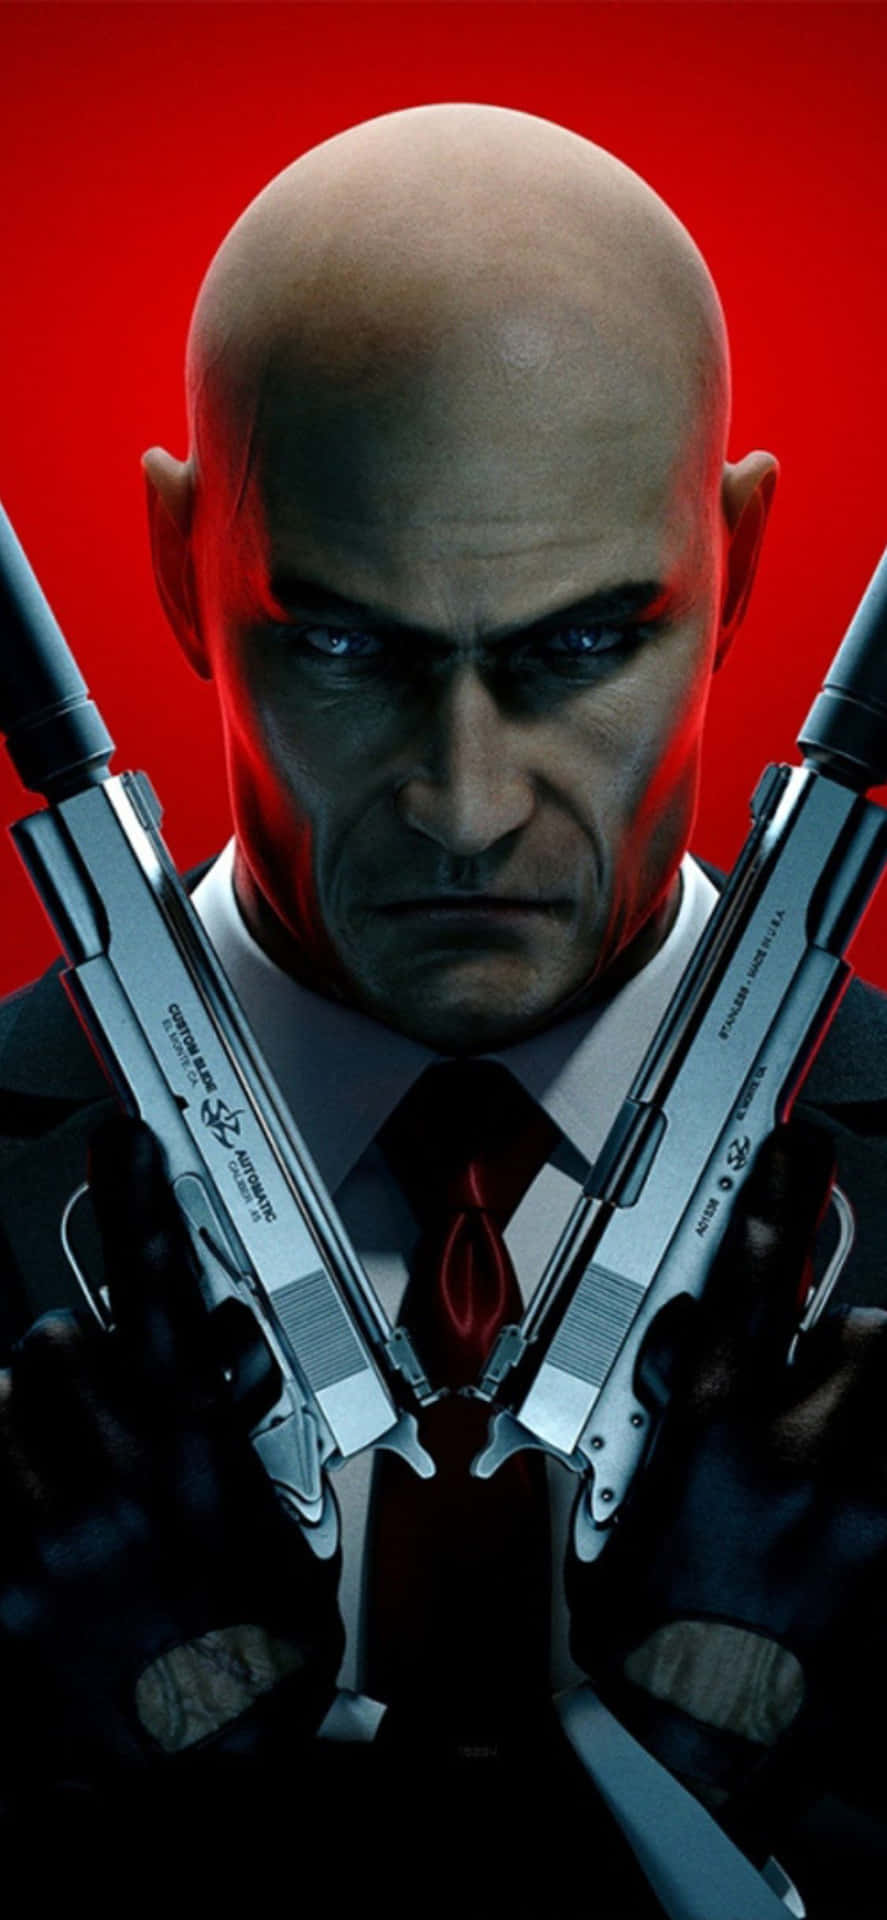 Iphone X Hitman Absolution Background Wallpaper